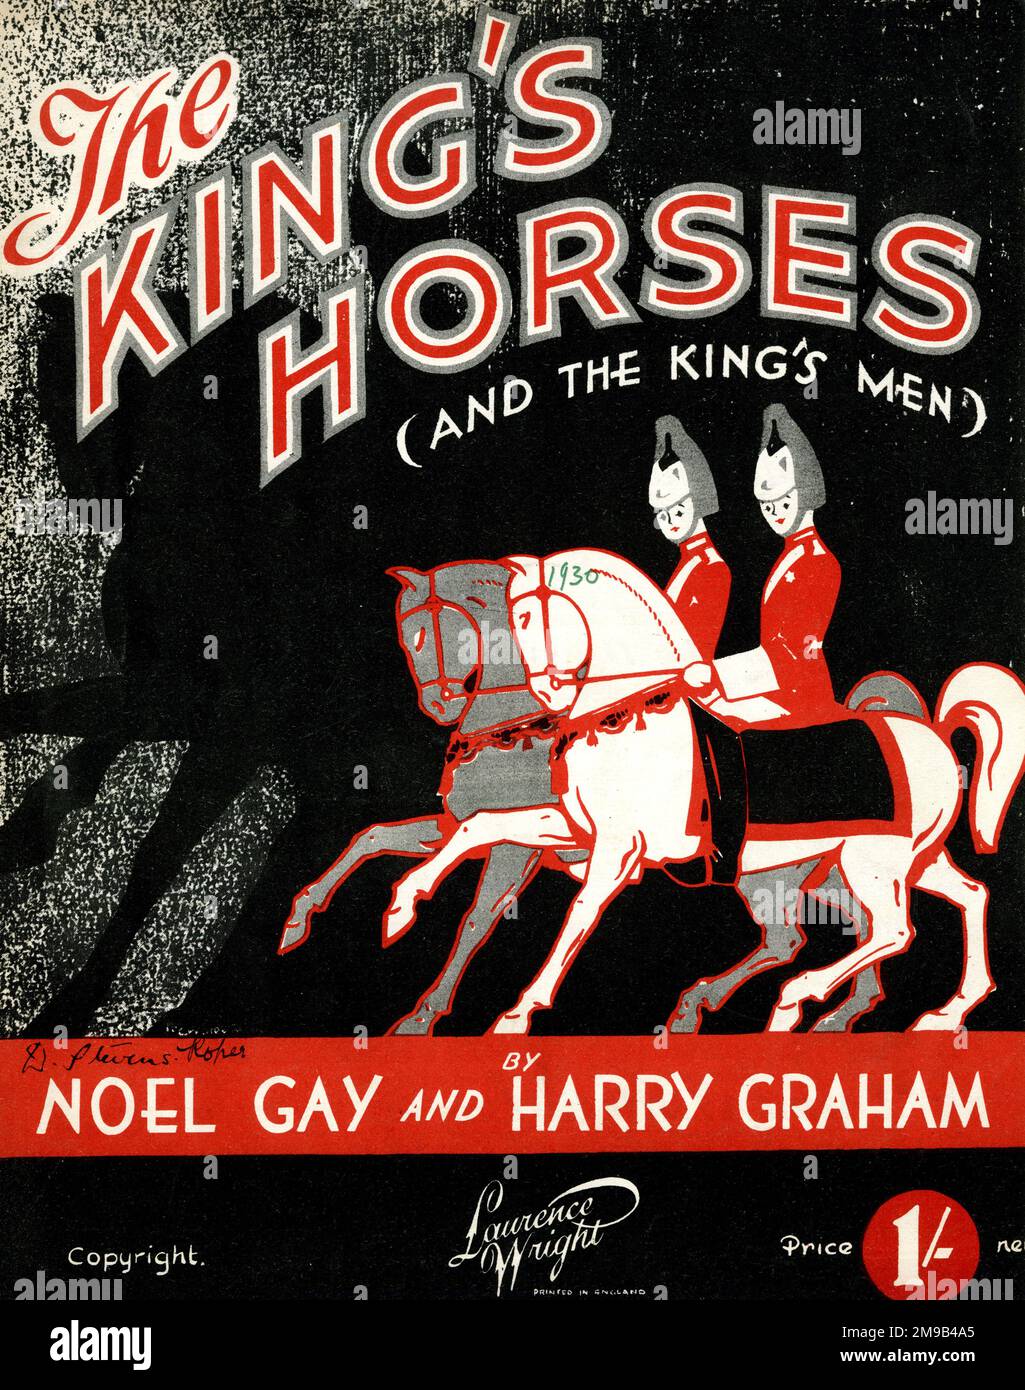 Music cover, The King's Horses and the King's Men by Noel Gay and Harry Graham. Stock Photo